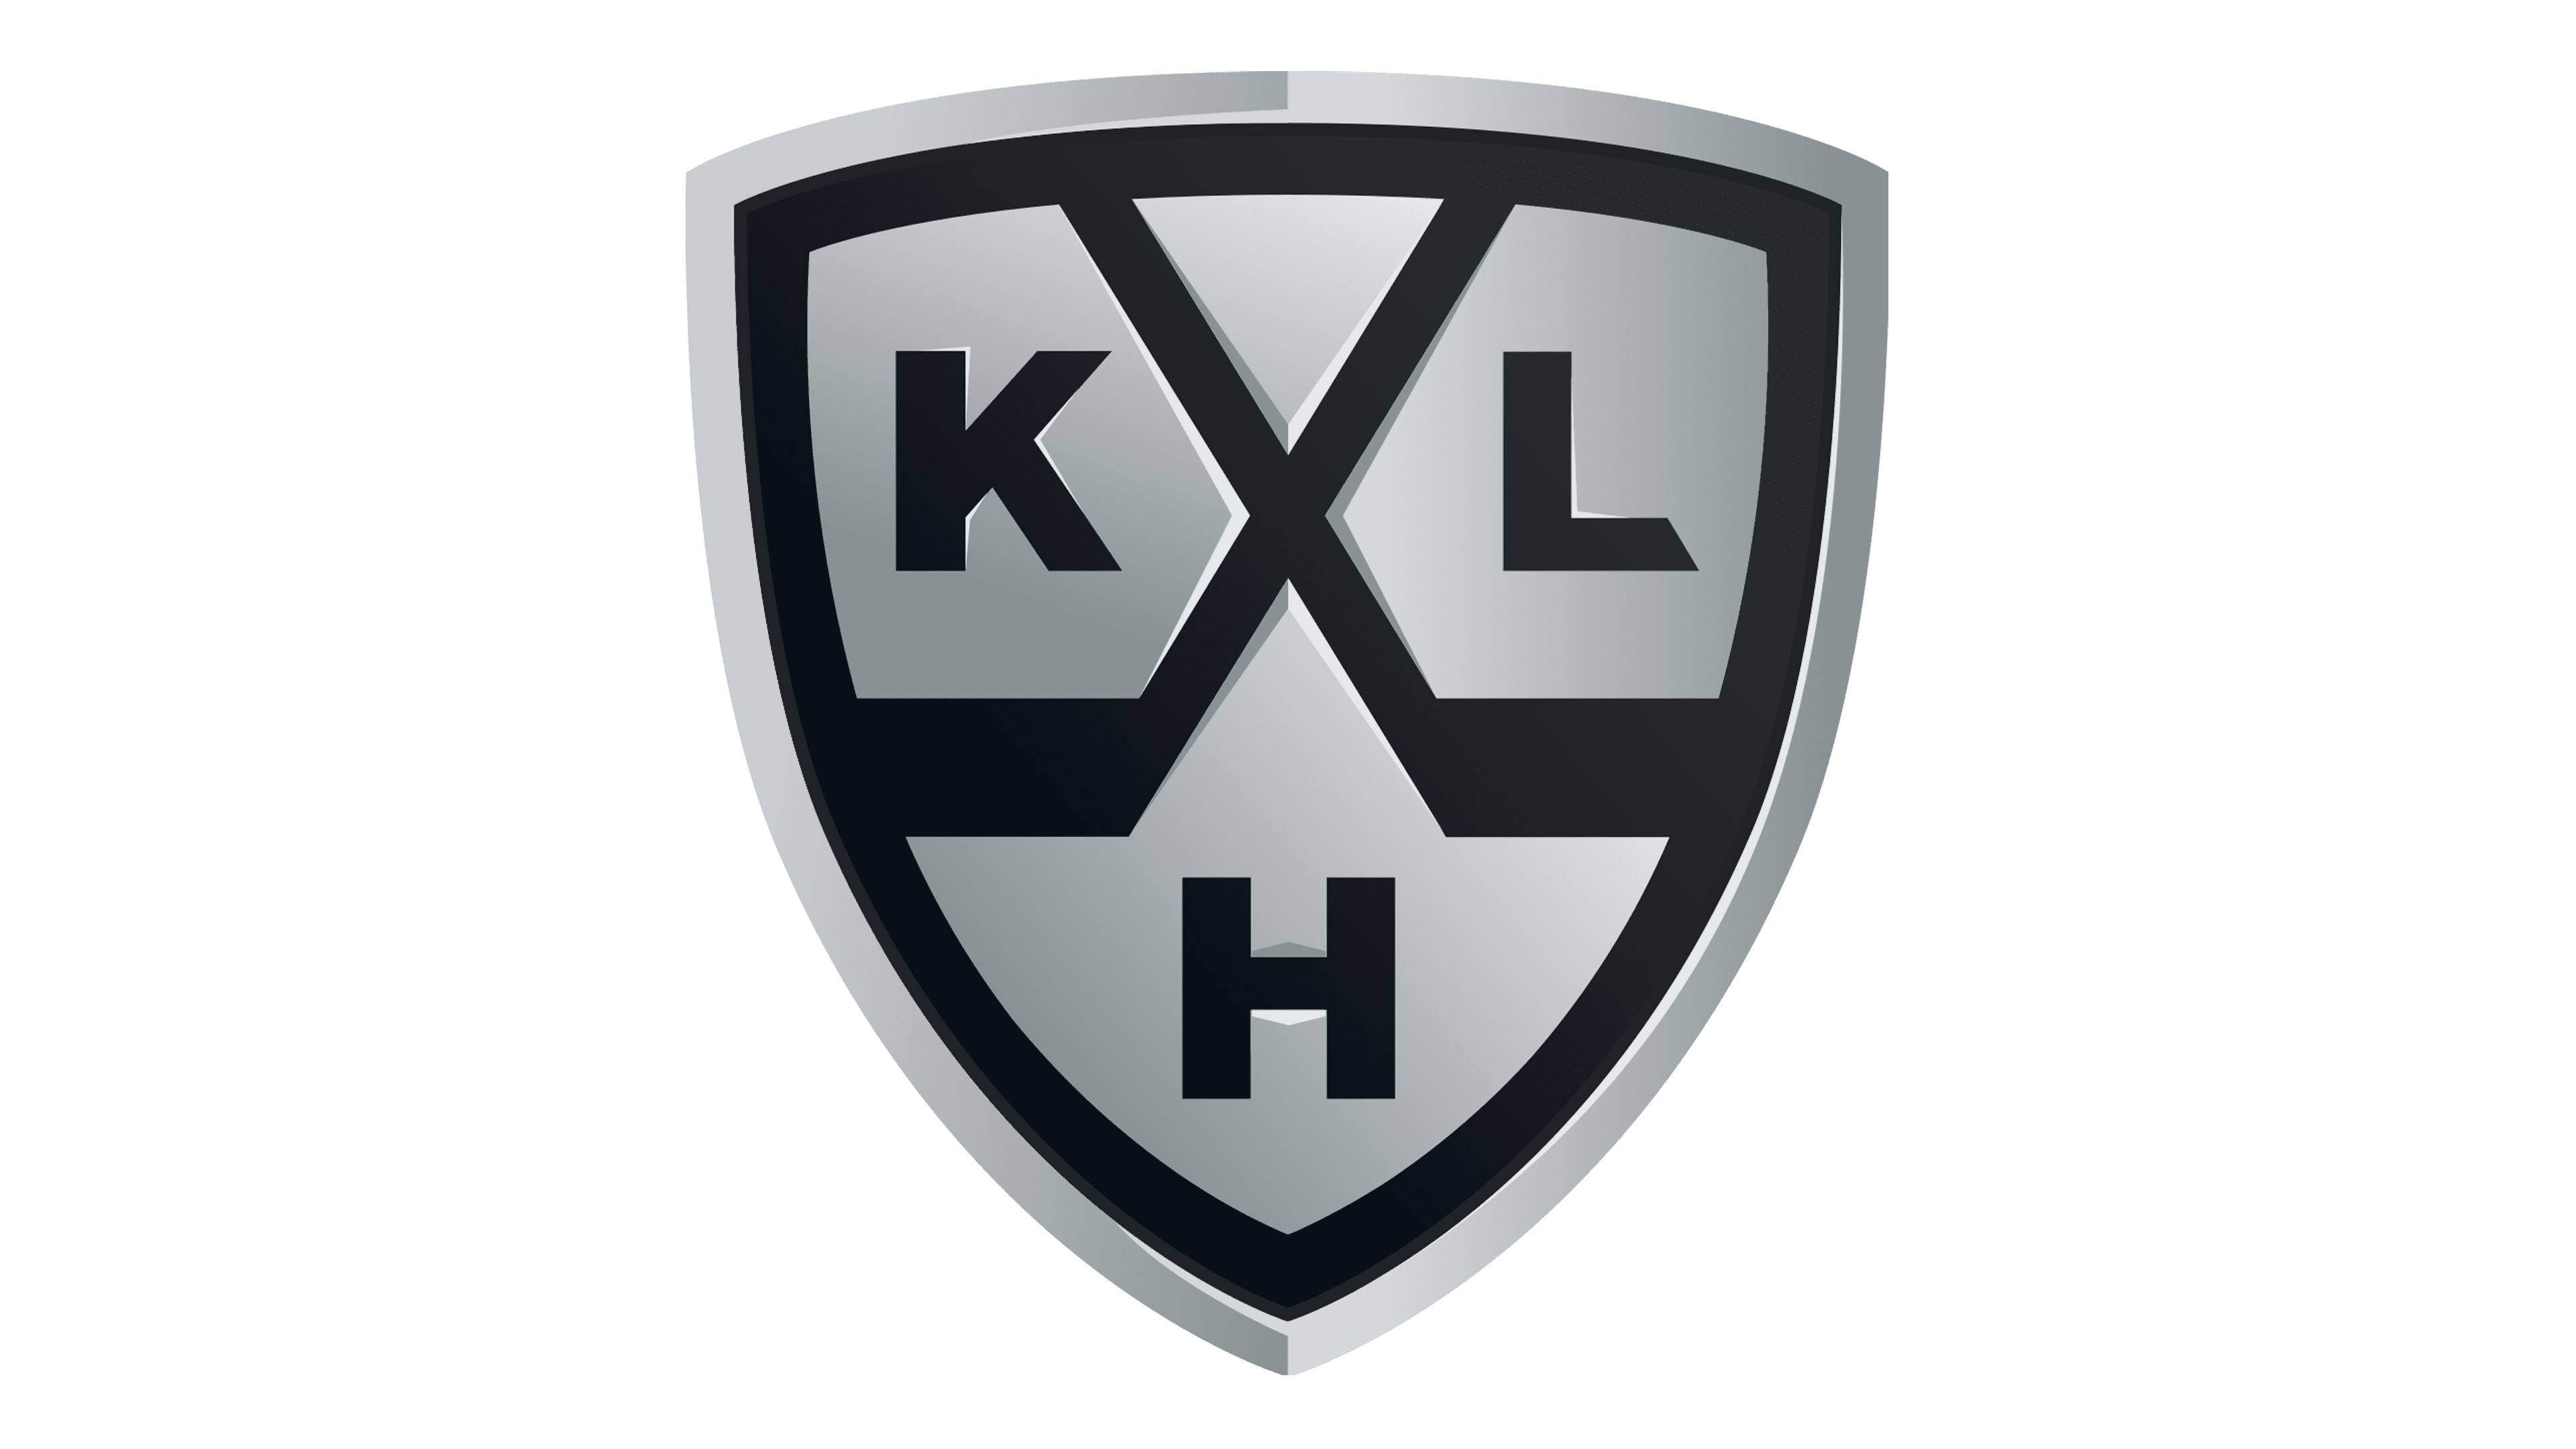 NHL Logo (National Hockey League) and symbol, meaning, history, PNG, brand